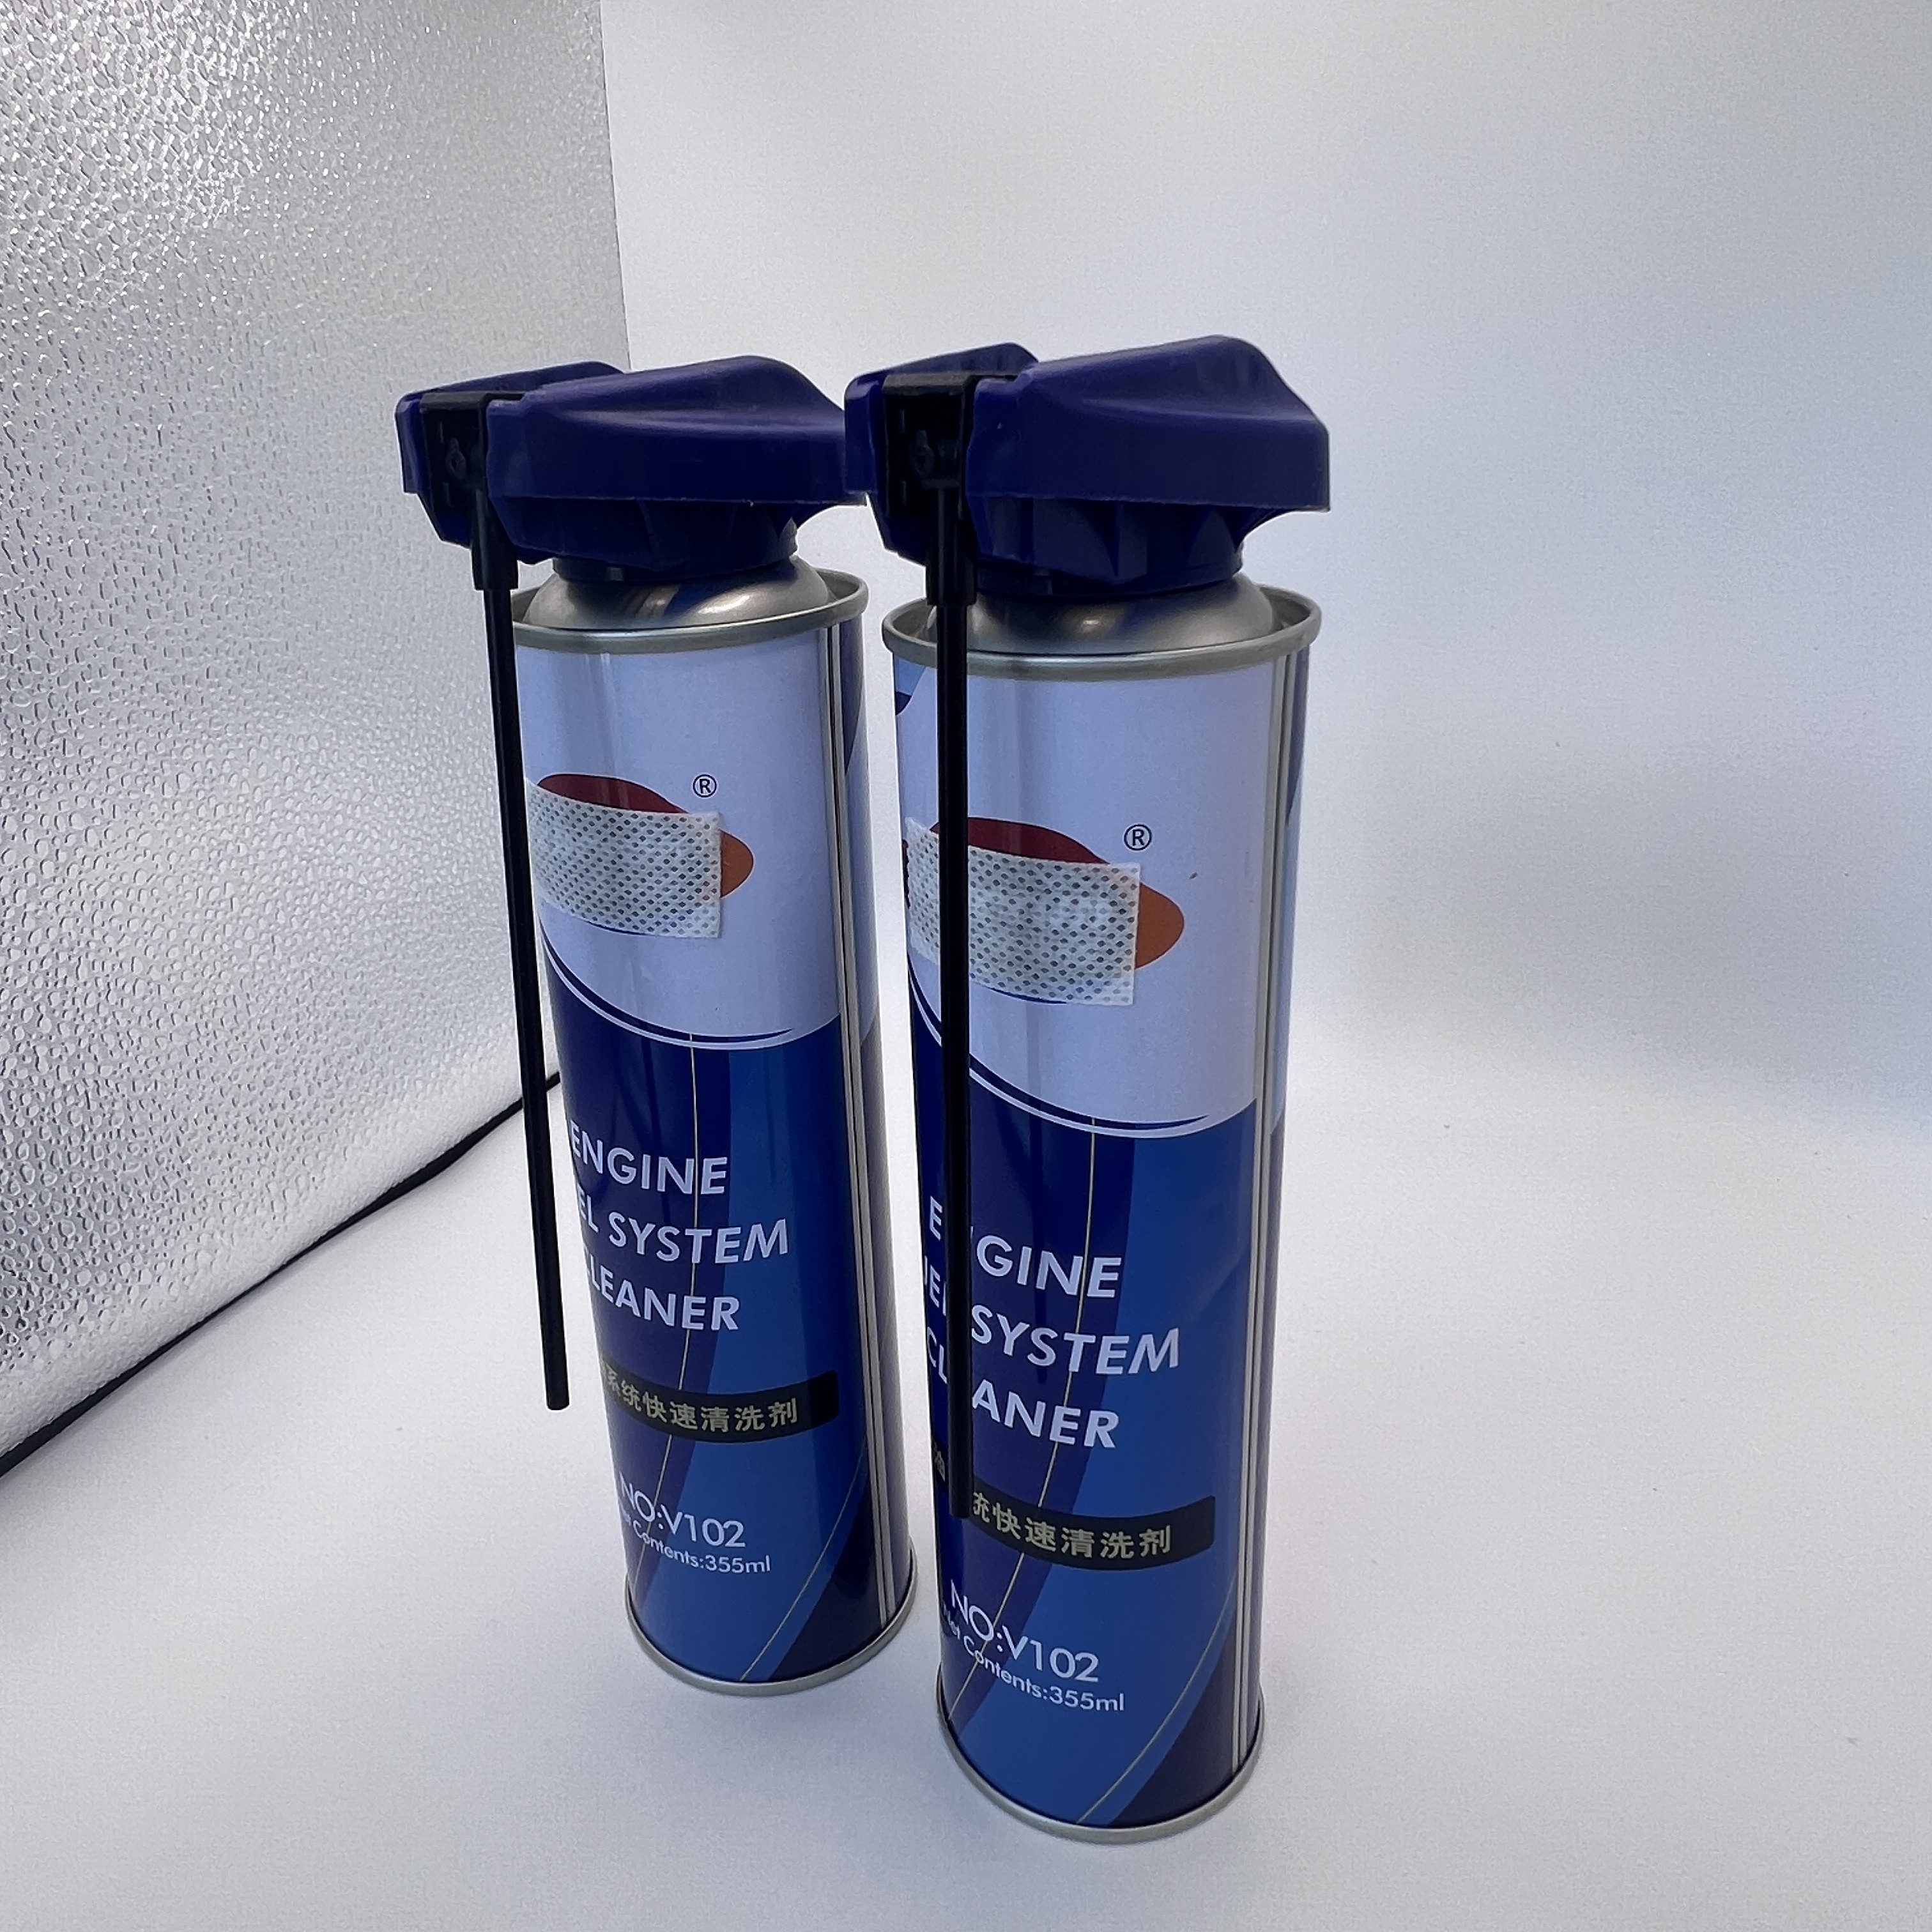 Versatile Aerosol Spray Nozzle for Household Cleaning - Easy and Effective